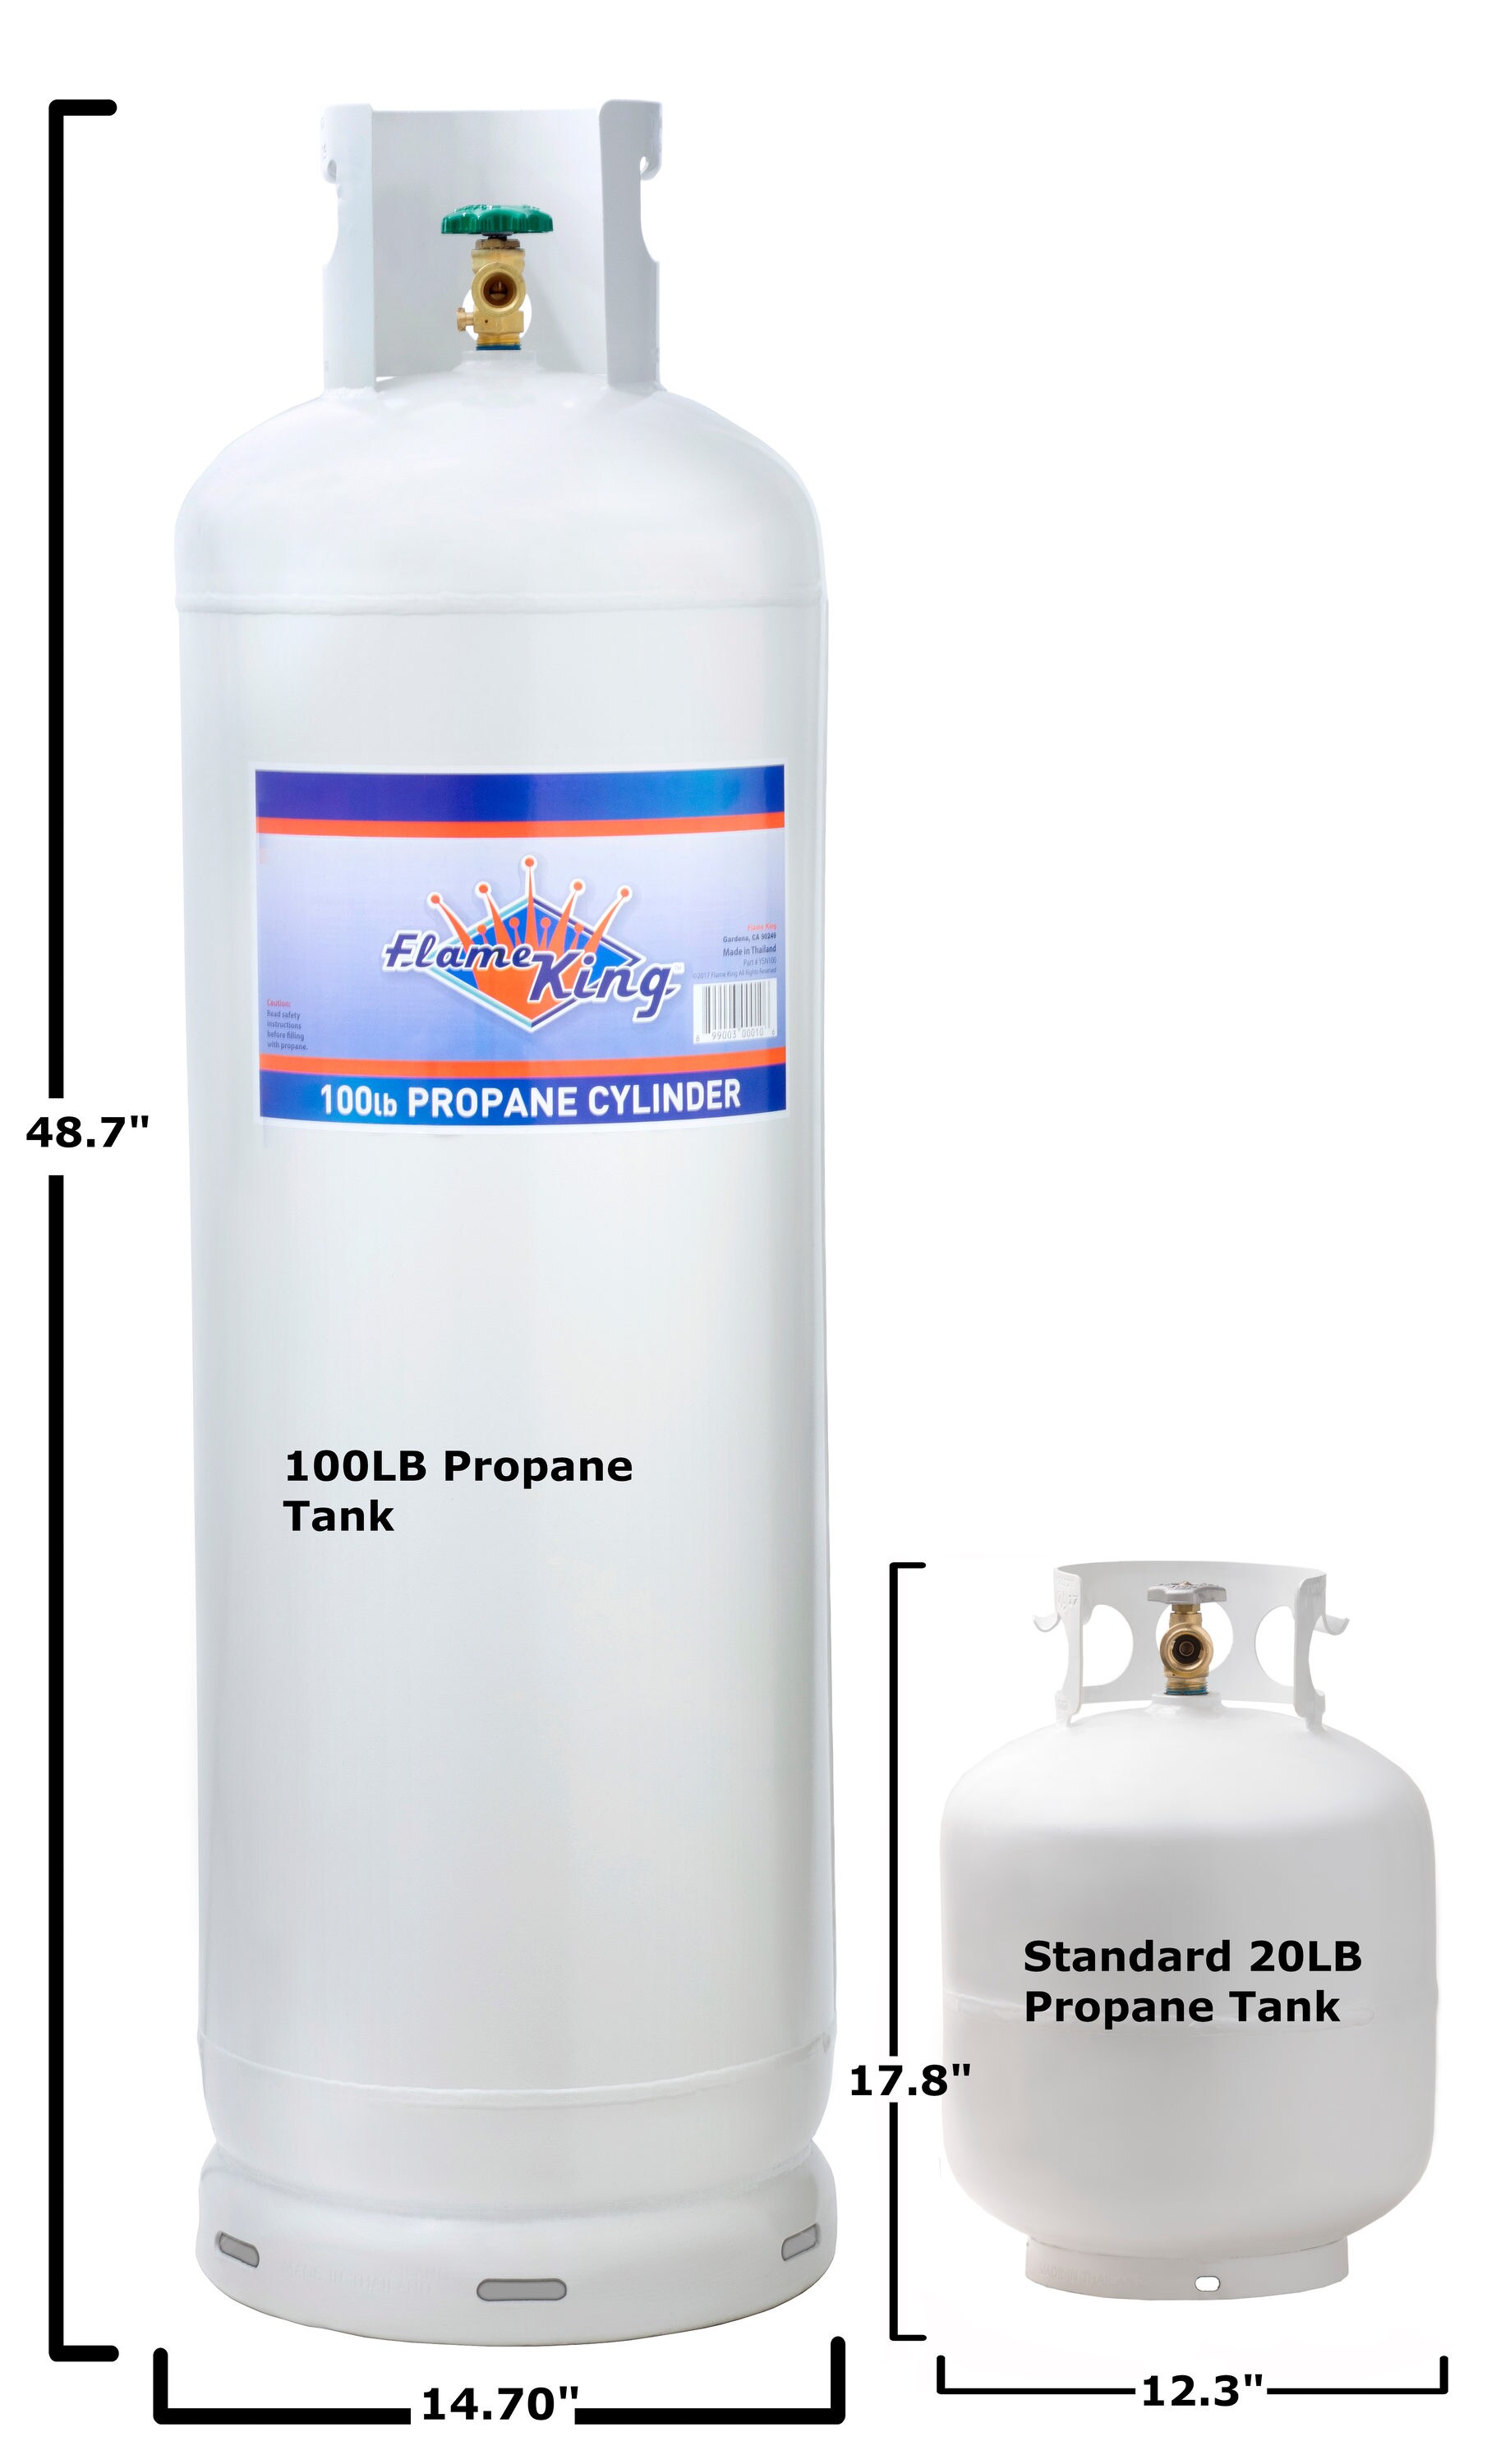 Does a 100 lb propane tank need an opd valve?